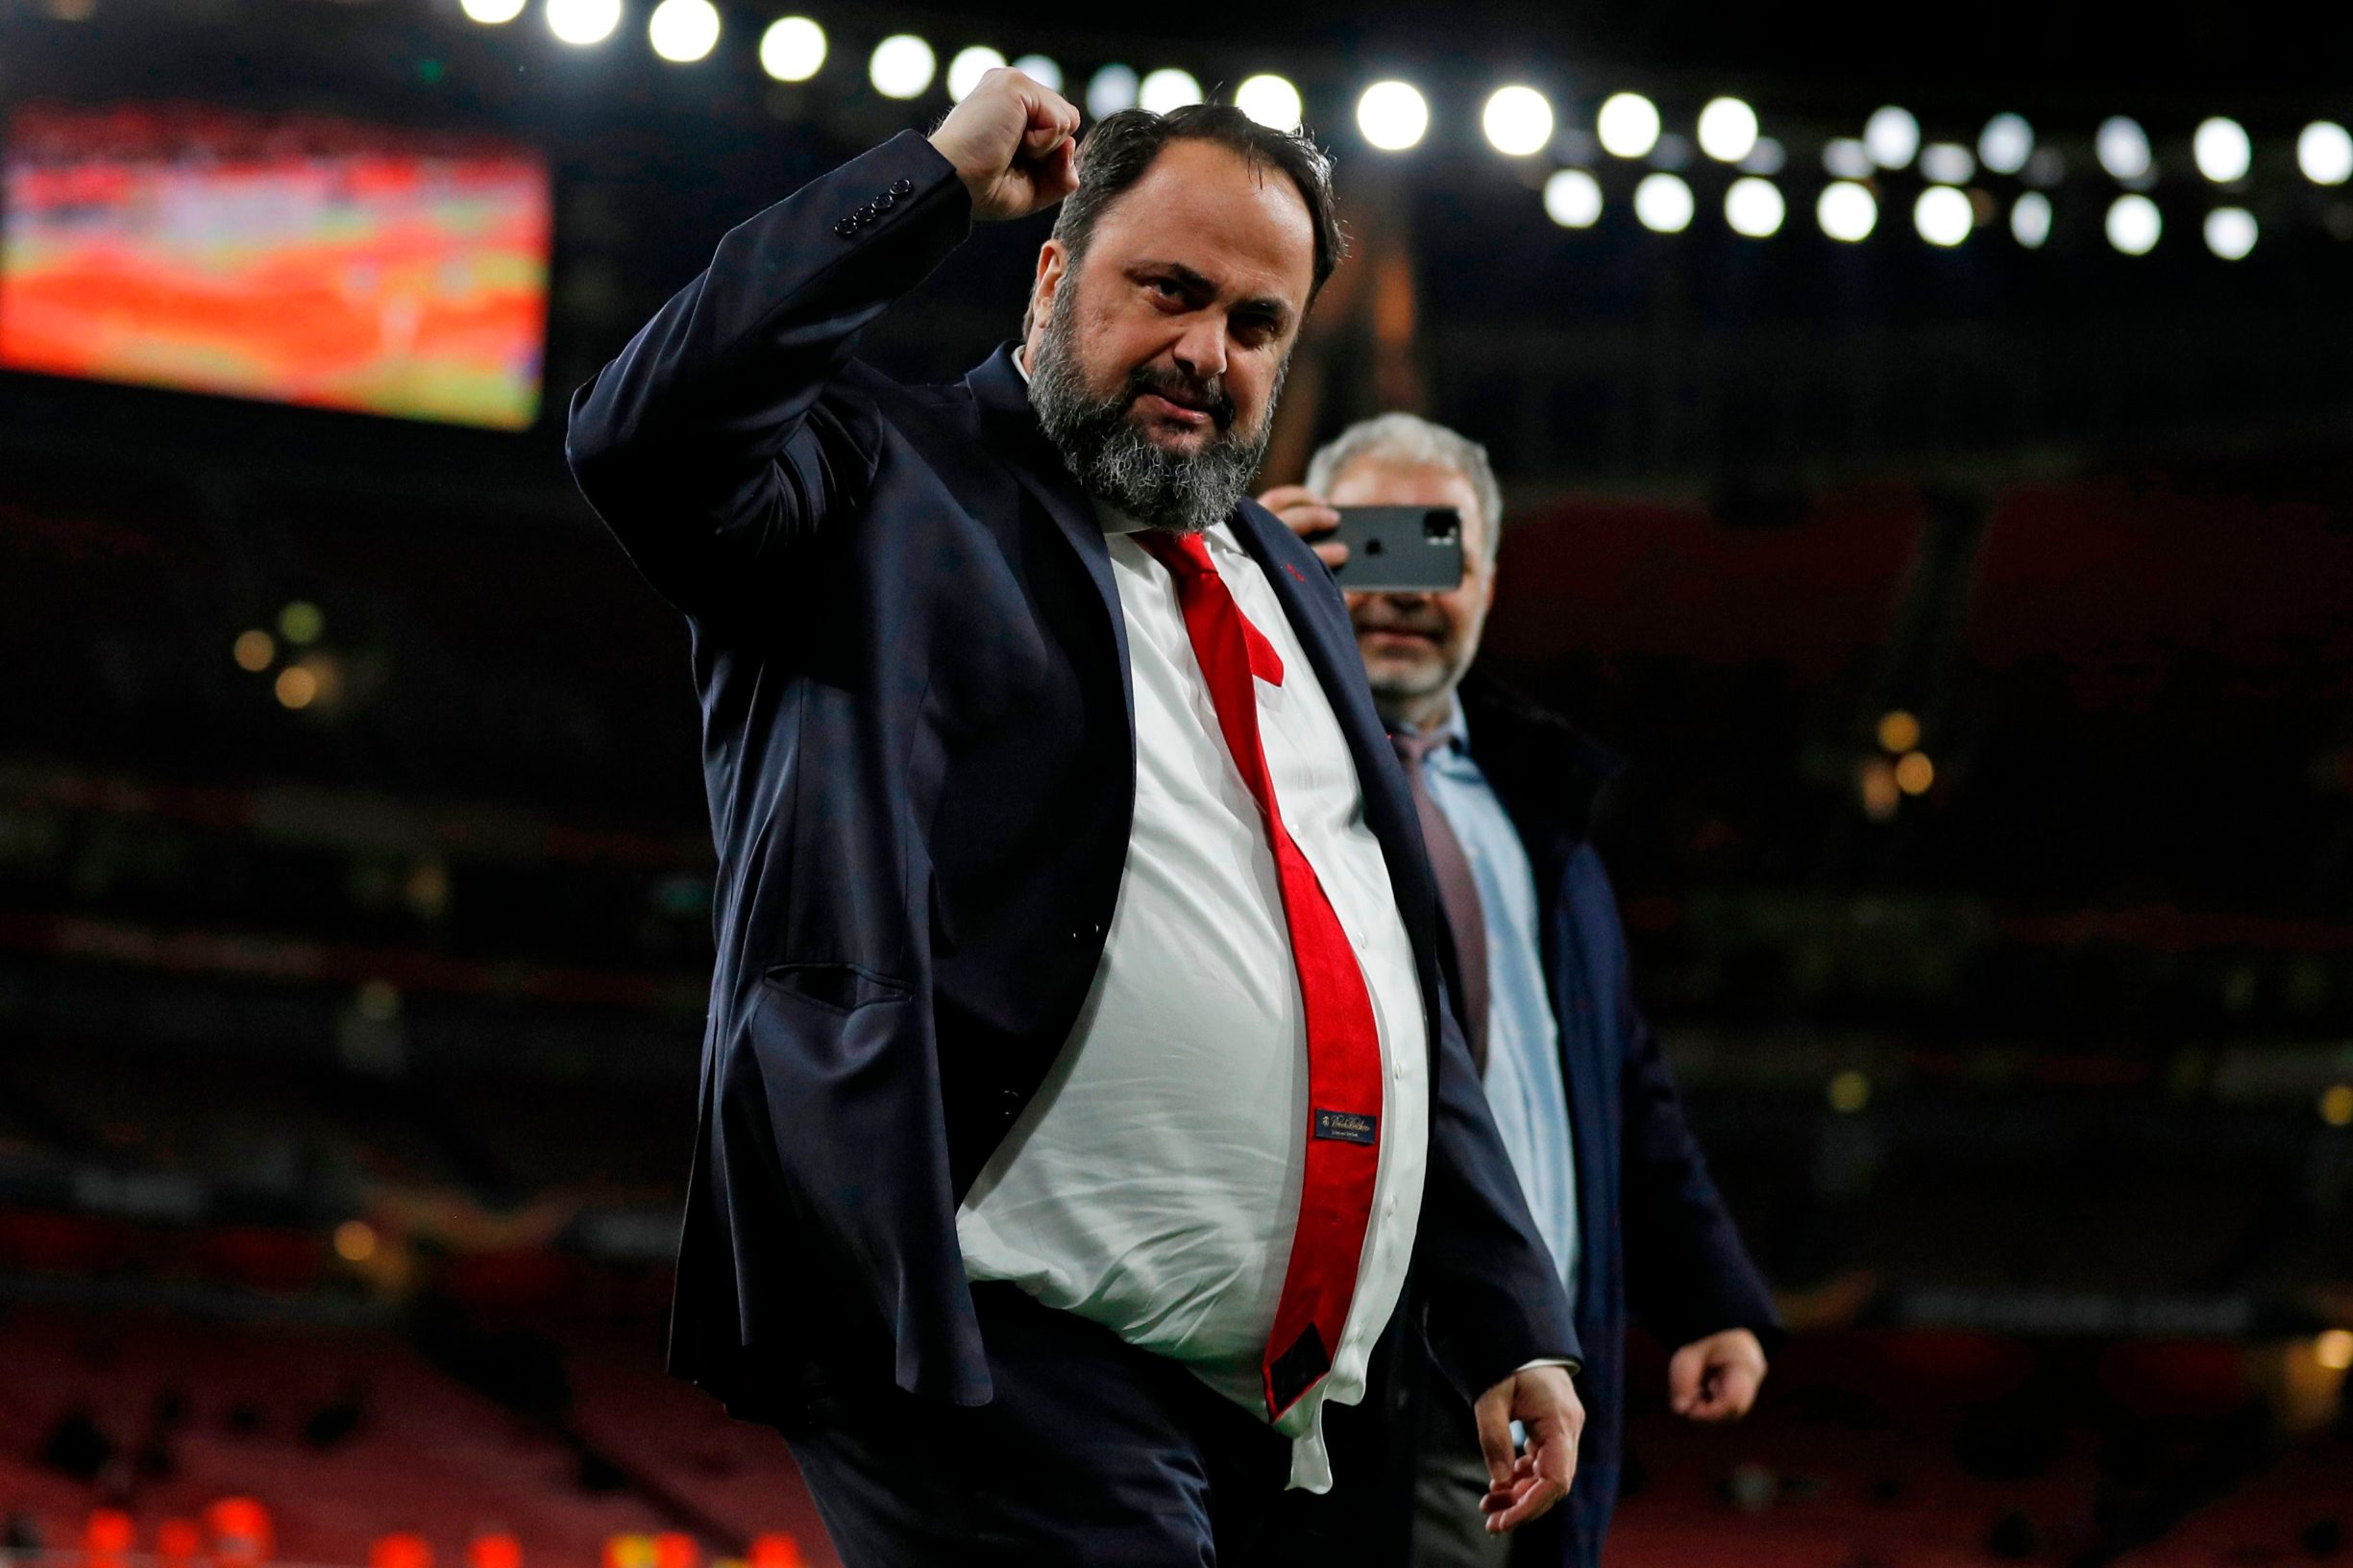 Olympiakos' president Evangelos Marinakis (C) celebrates on the pitch after the UEFA Europa league round of 32 second leg football match between Arsenal and Olympiakos at the Emirates stadium in London on February 27, 2020. - The game finished 2-2 on aggregate after extra time, Olympiakos winning the tie on away goals. (Photo by Adrian DENNIS / AFP)